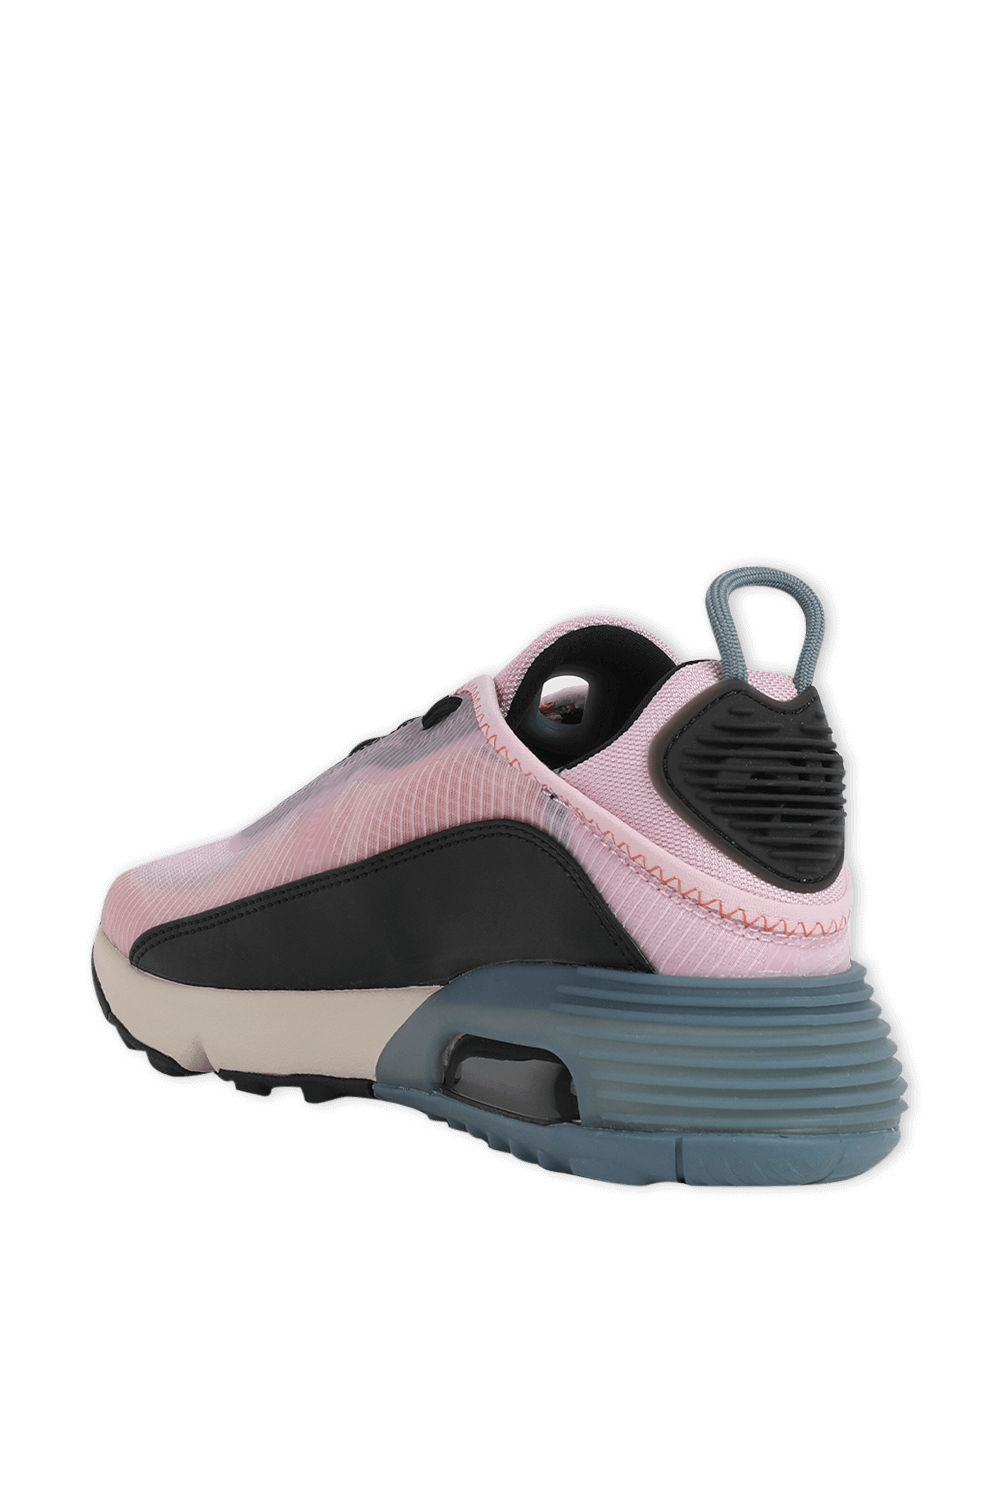 Nike Air Max 2090 in Pink and Blue NIKE